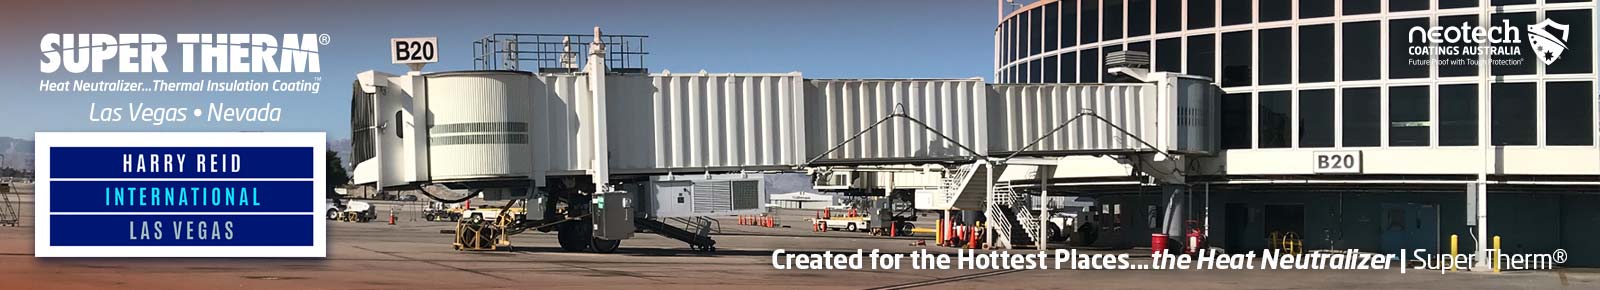 Super Therm thermal insulation coating applied to over 100 air jet bridges at Harry Reid Las Vegas International airport. Super Therm distributor in Australia, NEOtech Coatings